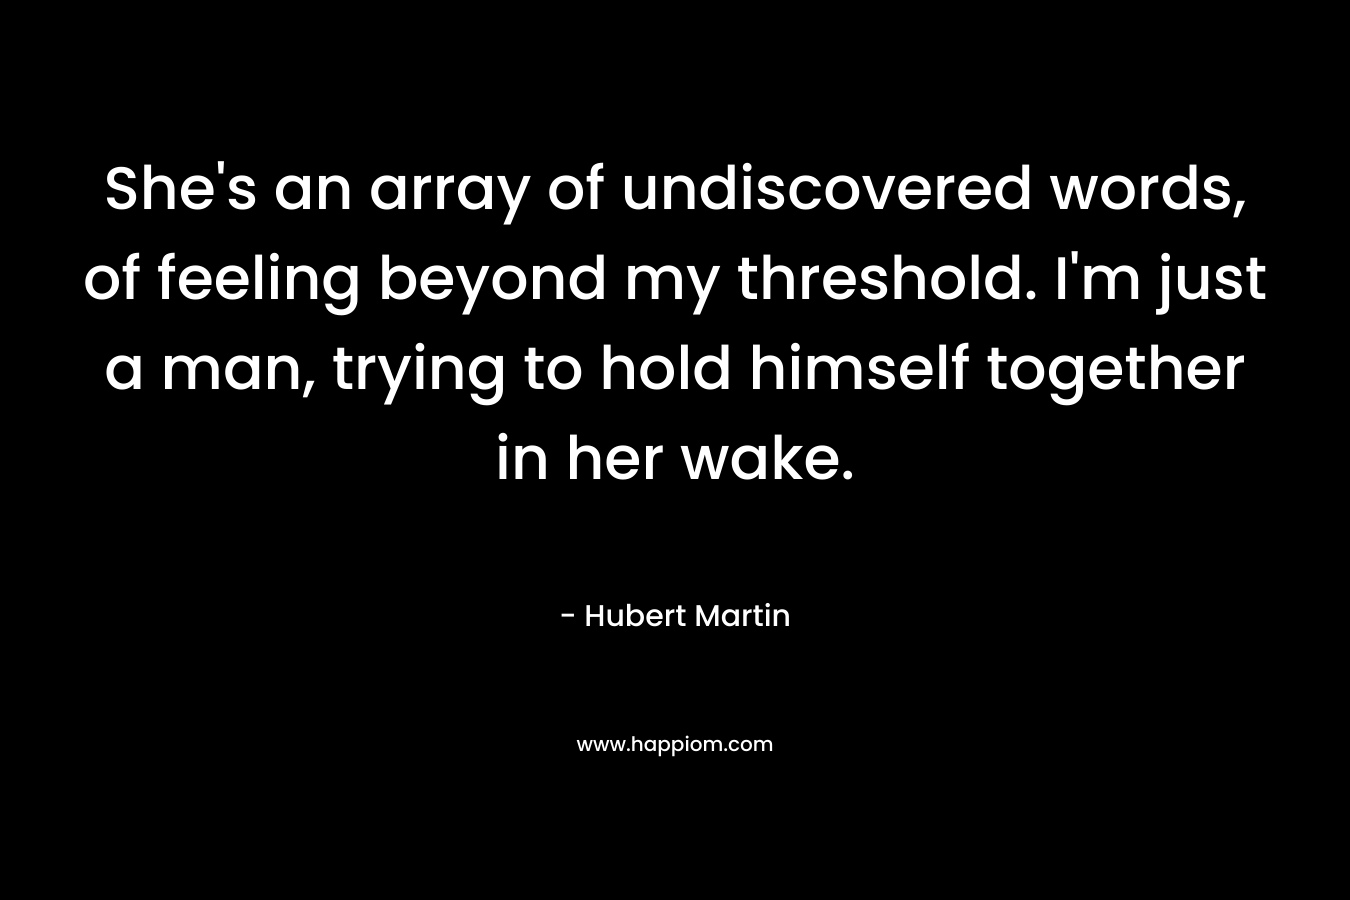 She’s an array of undiscovered words, of feeling beyond my threshold. I’m just a man, trying to hold himself together in her wake. – Hubert Martin